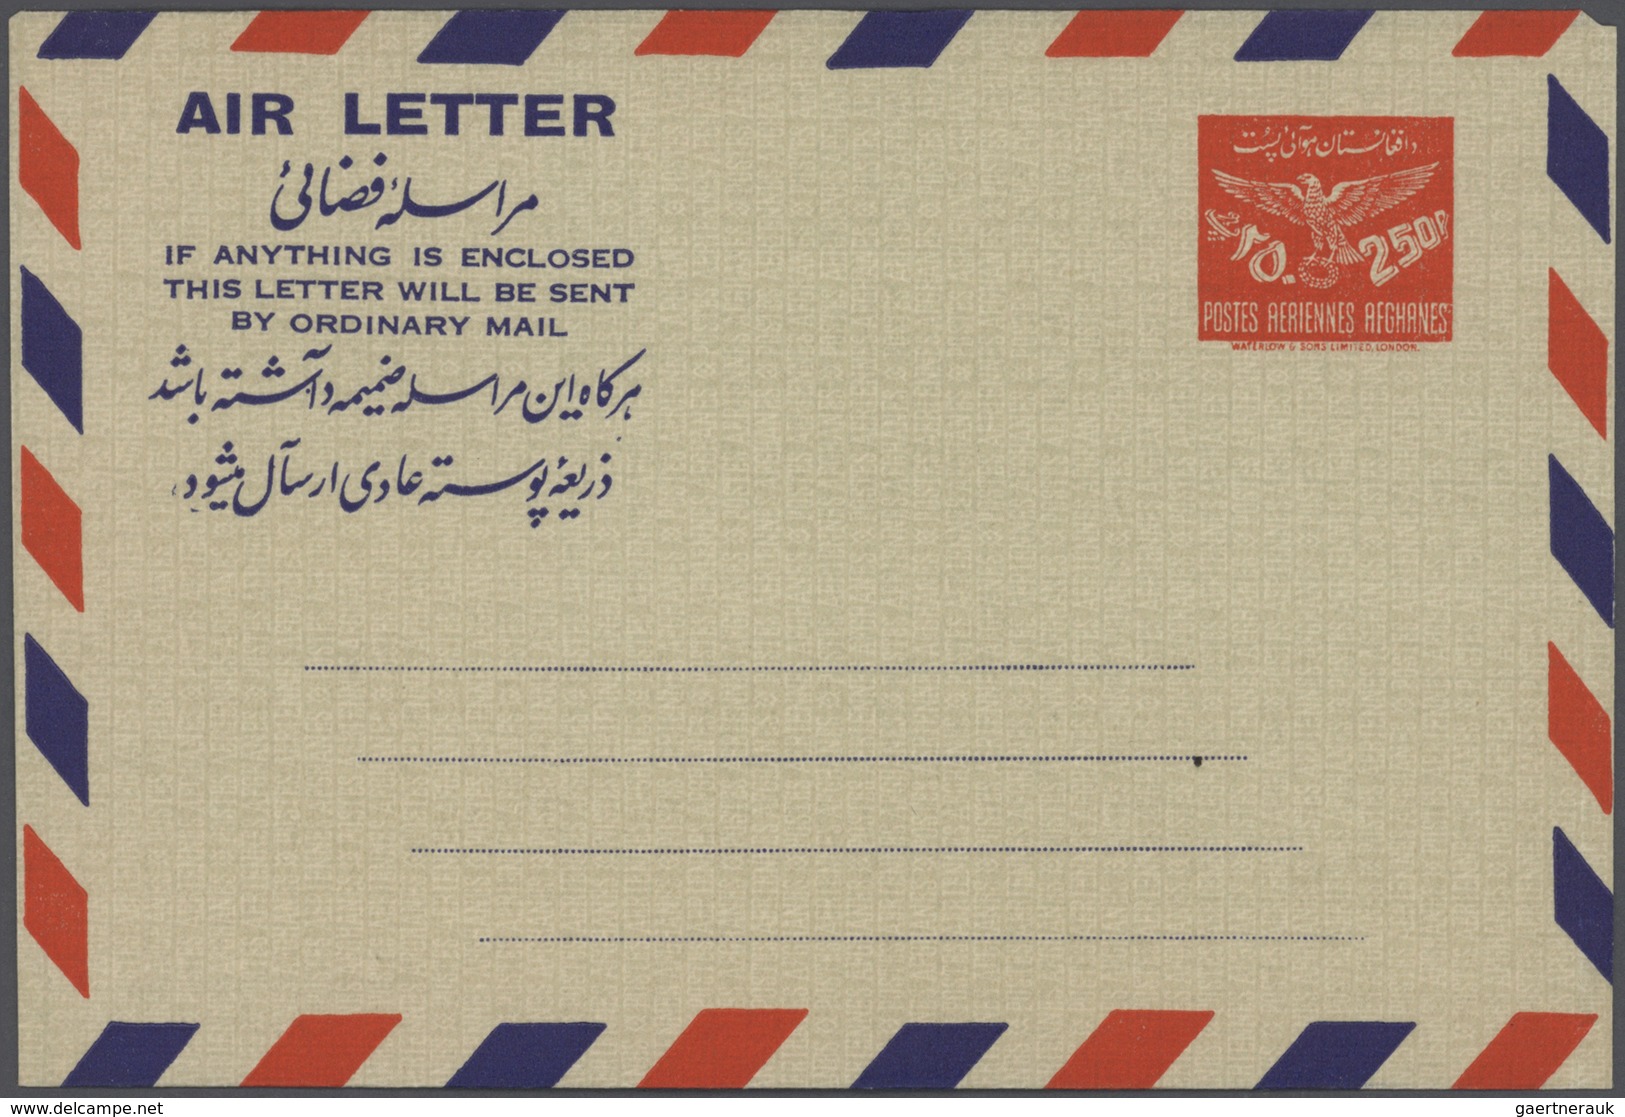 Afghanistan - Ganzsachen: 1945/ phantastic collection of ca. 894 used and unused airletters one fore